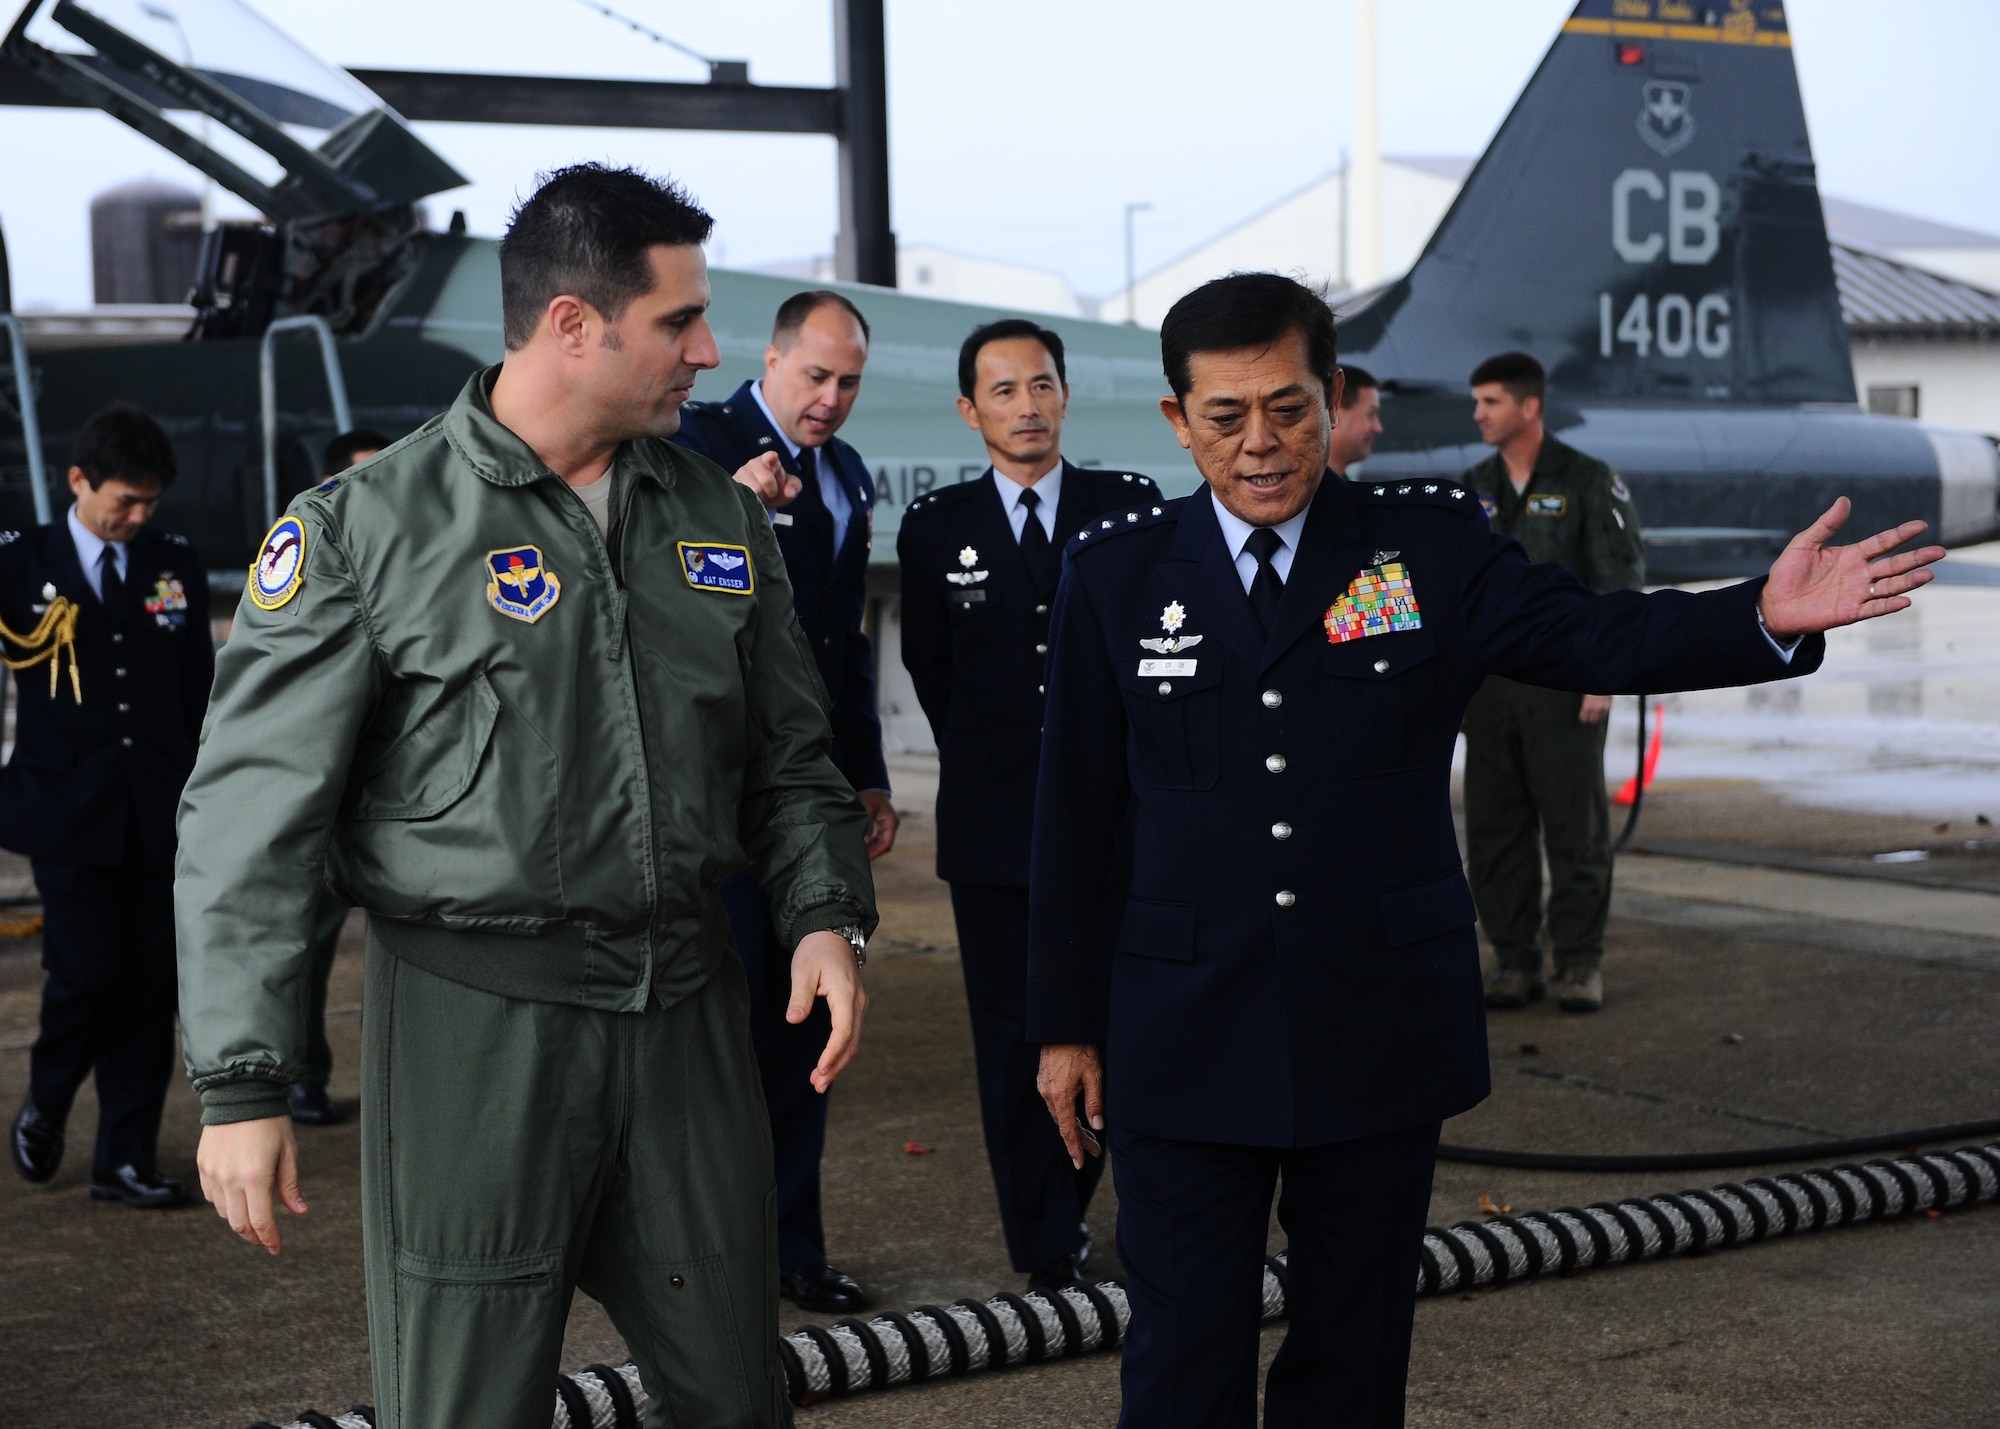 Columbus Air Force Base pilots display the T-38C Talon and the T-6A Texan II to Gen. Harukazu Saitoh, Japan Air Self-Defense Force Chief of Staff, and JASDF staff during their base tour Dec. 2 on the Columbus Air Force Base flightline. The JASDF’s pilot training in the U.S. Air Force began in 1991. Since then, over 200 JASDF pilots have completed the training. (U.S. Air Force photo/Airman Daniel Lile)